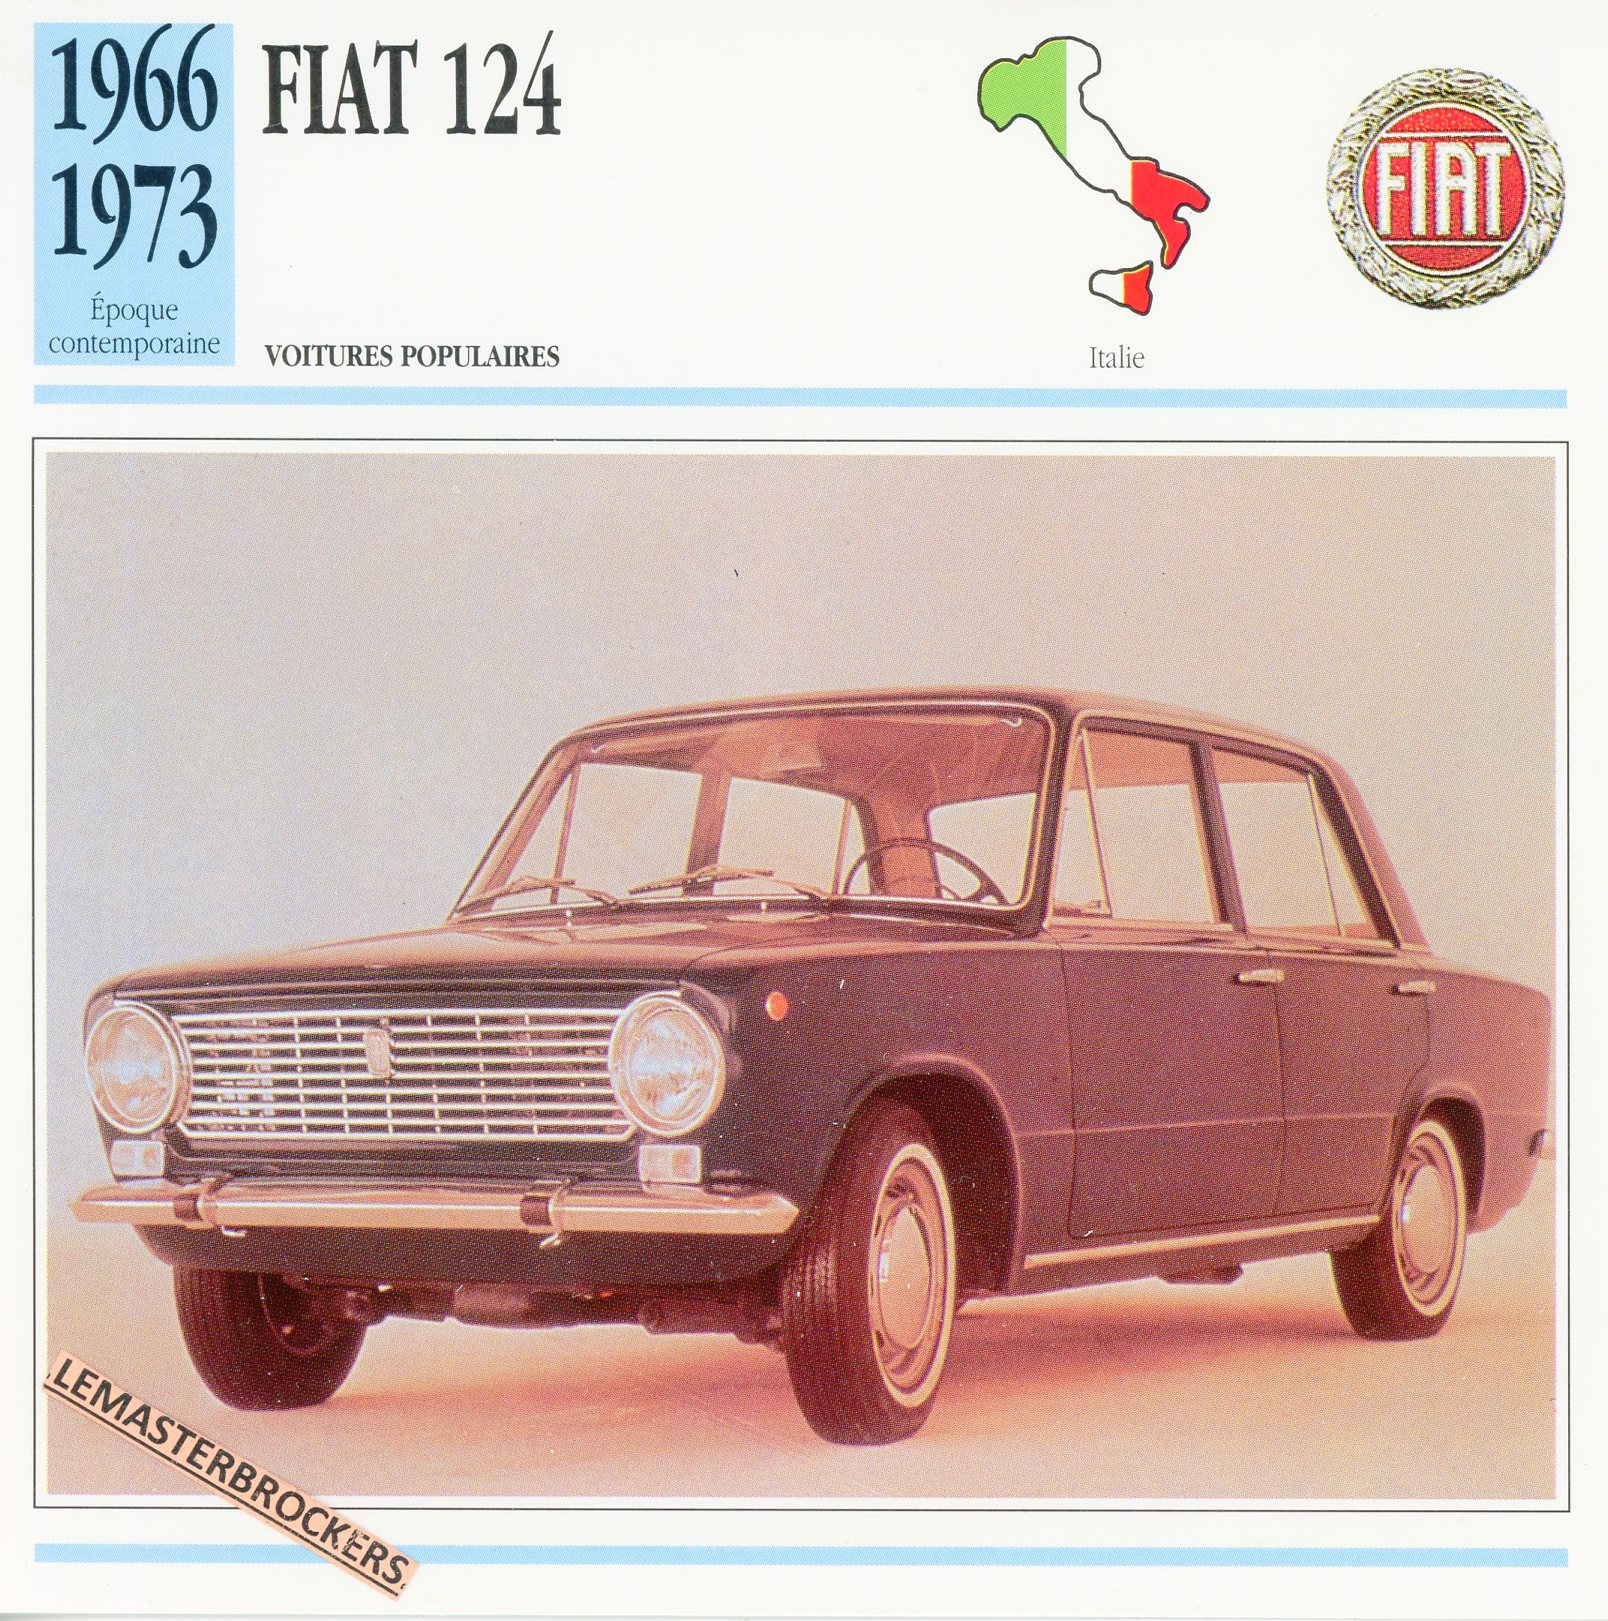 FICHE-FIAT-124-LEMASTERBROCKERS-FICHE-AUTO-CARS-CARD-ATLAS-FRENCH